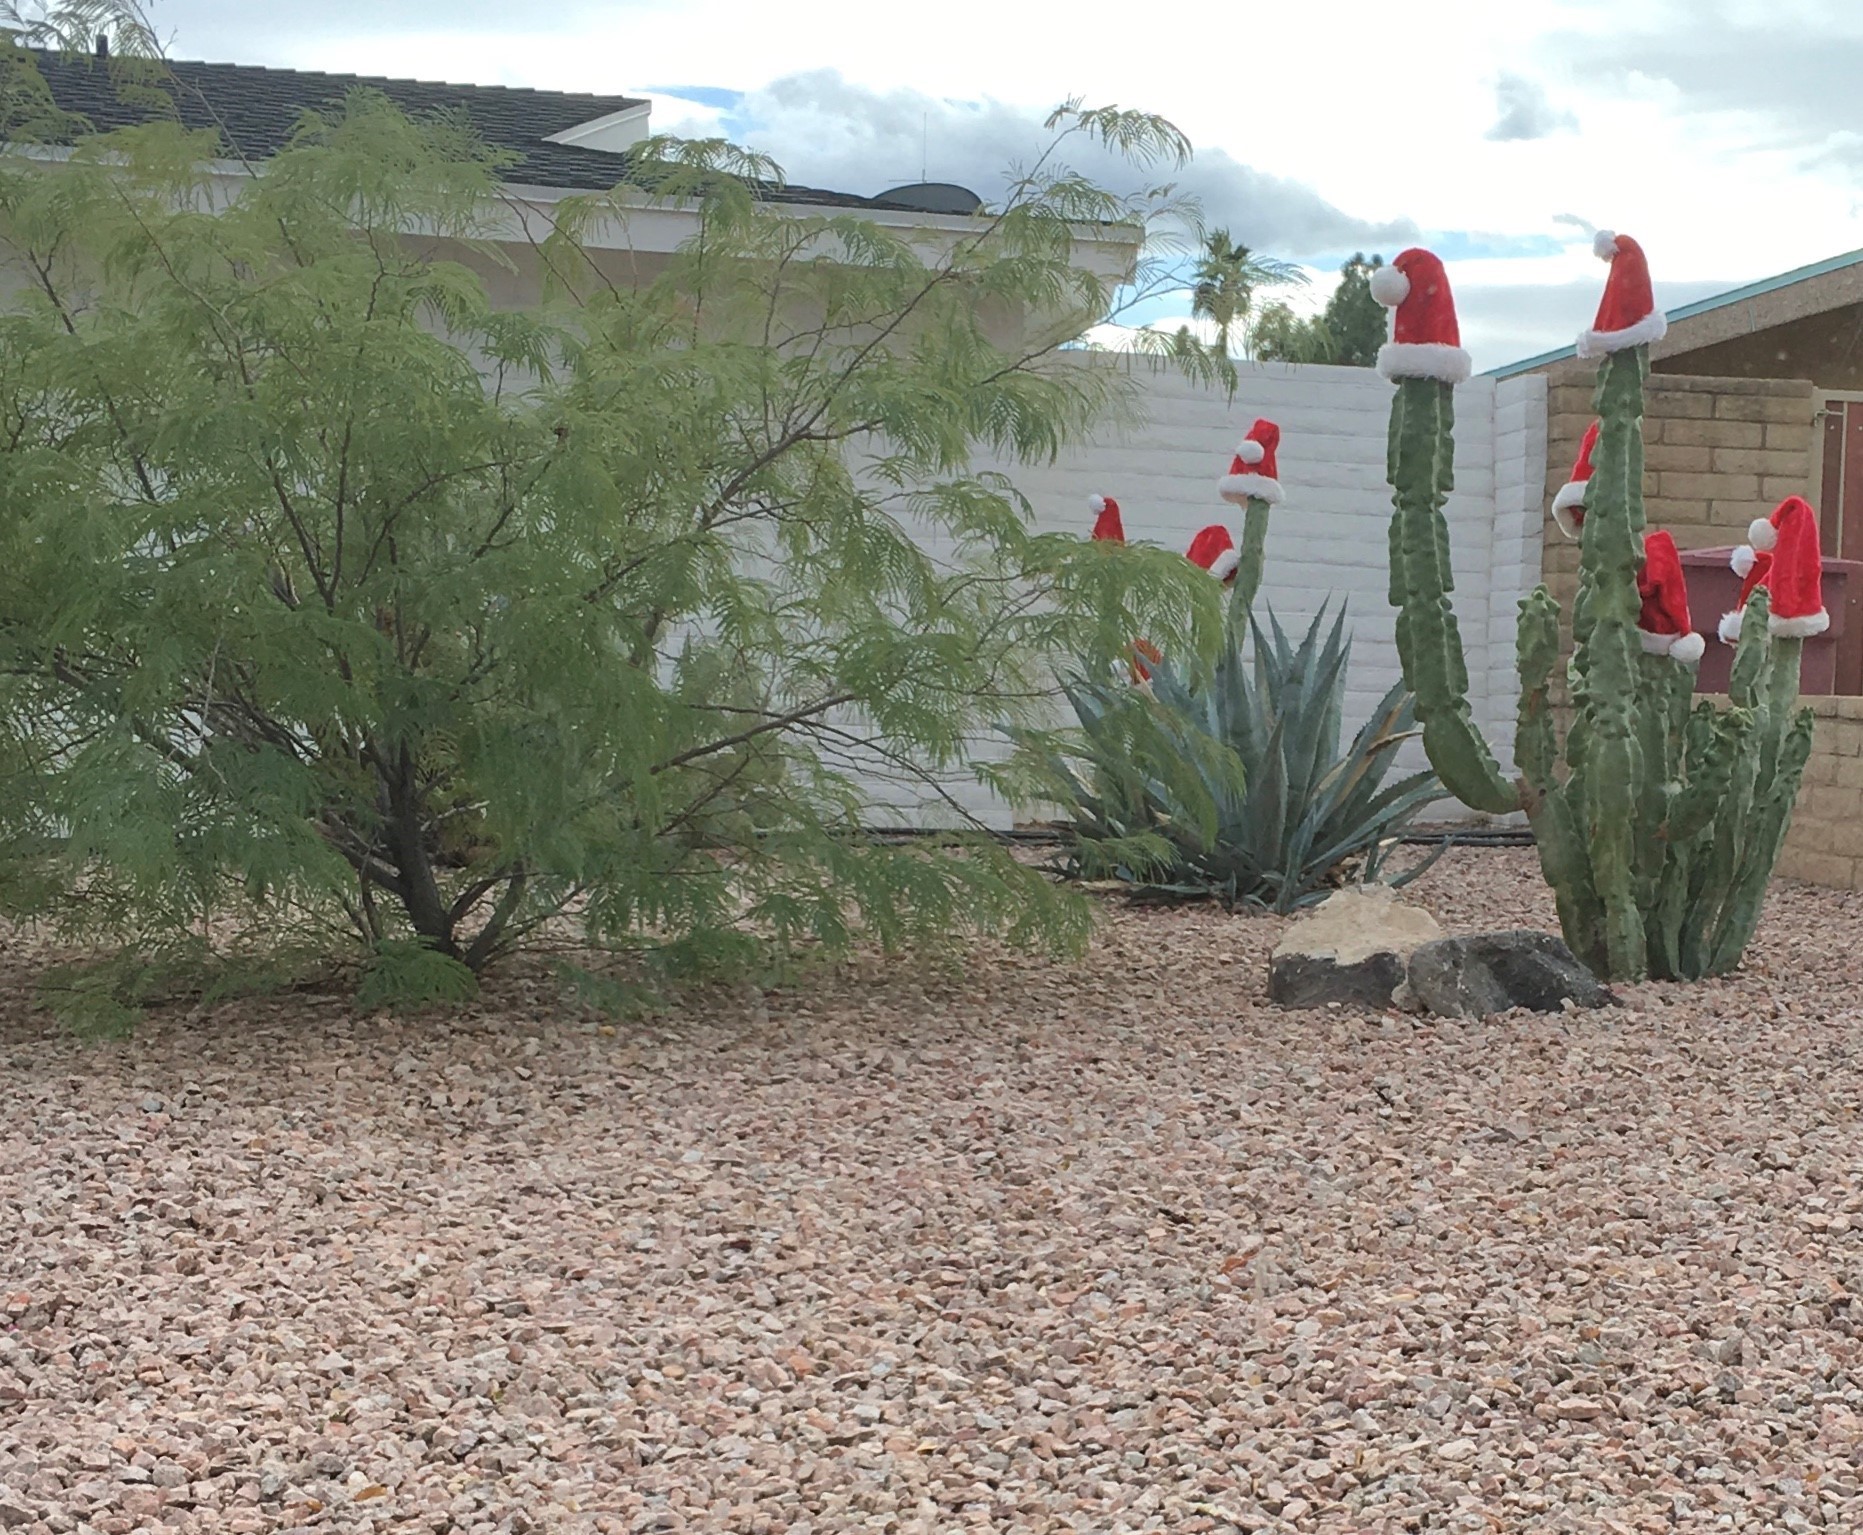 Cactus decorated with Santa hats